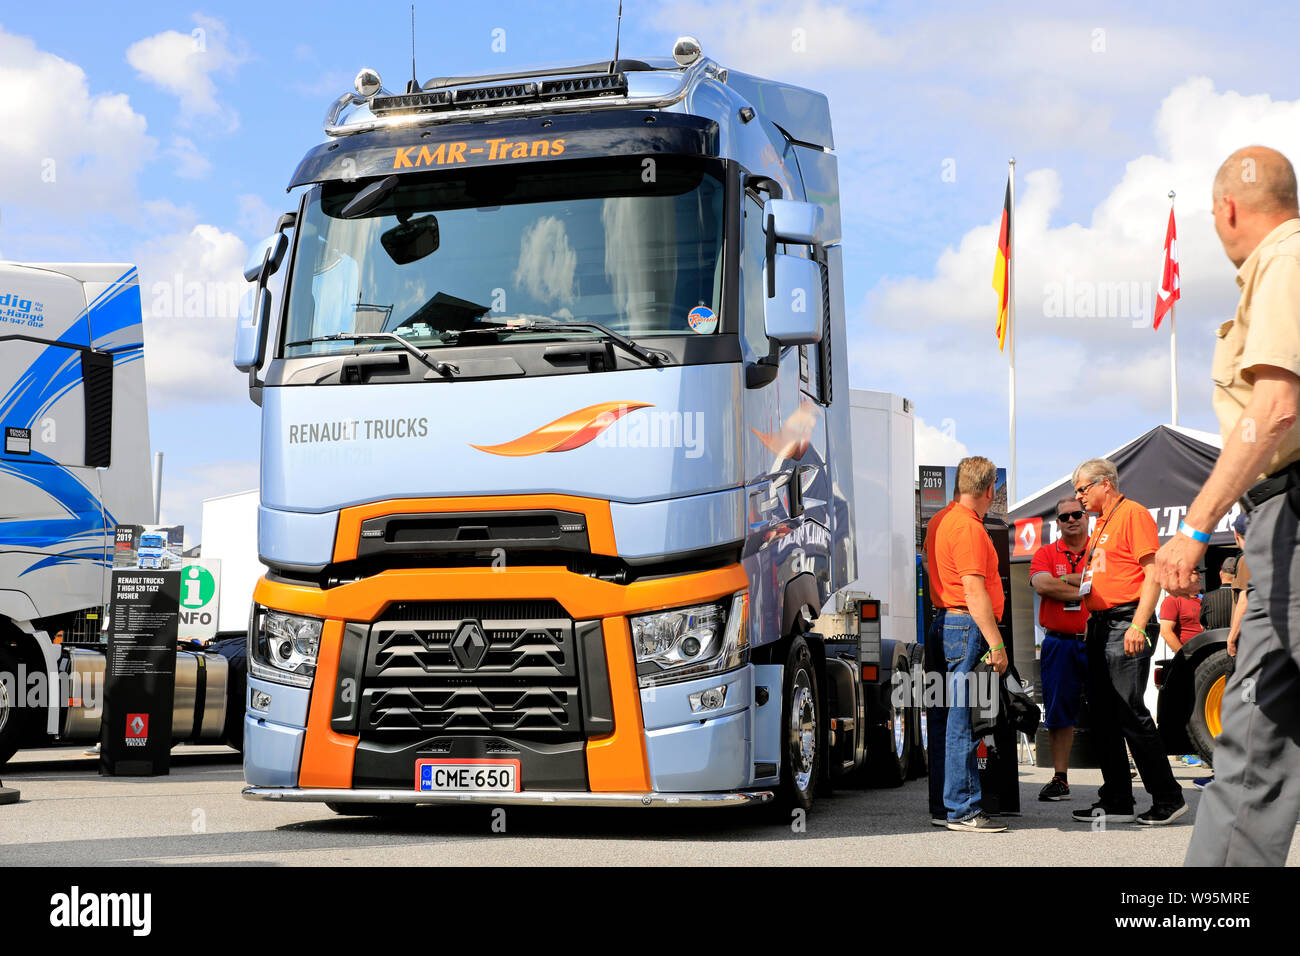 Alaharma, Finland. August 9, 2019. Renault Trucks T 520 High 6X2 tractor  unit of AB KMR-Trans Oy on Renault Trucks stand on Power Truck Show 2019  Stock Photo - Alamy